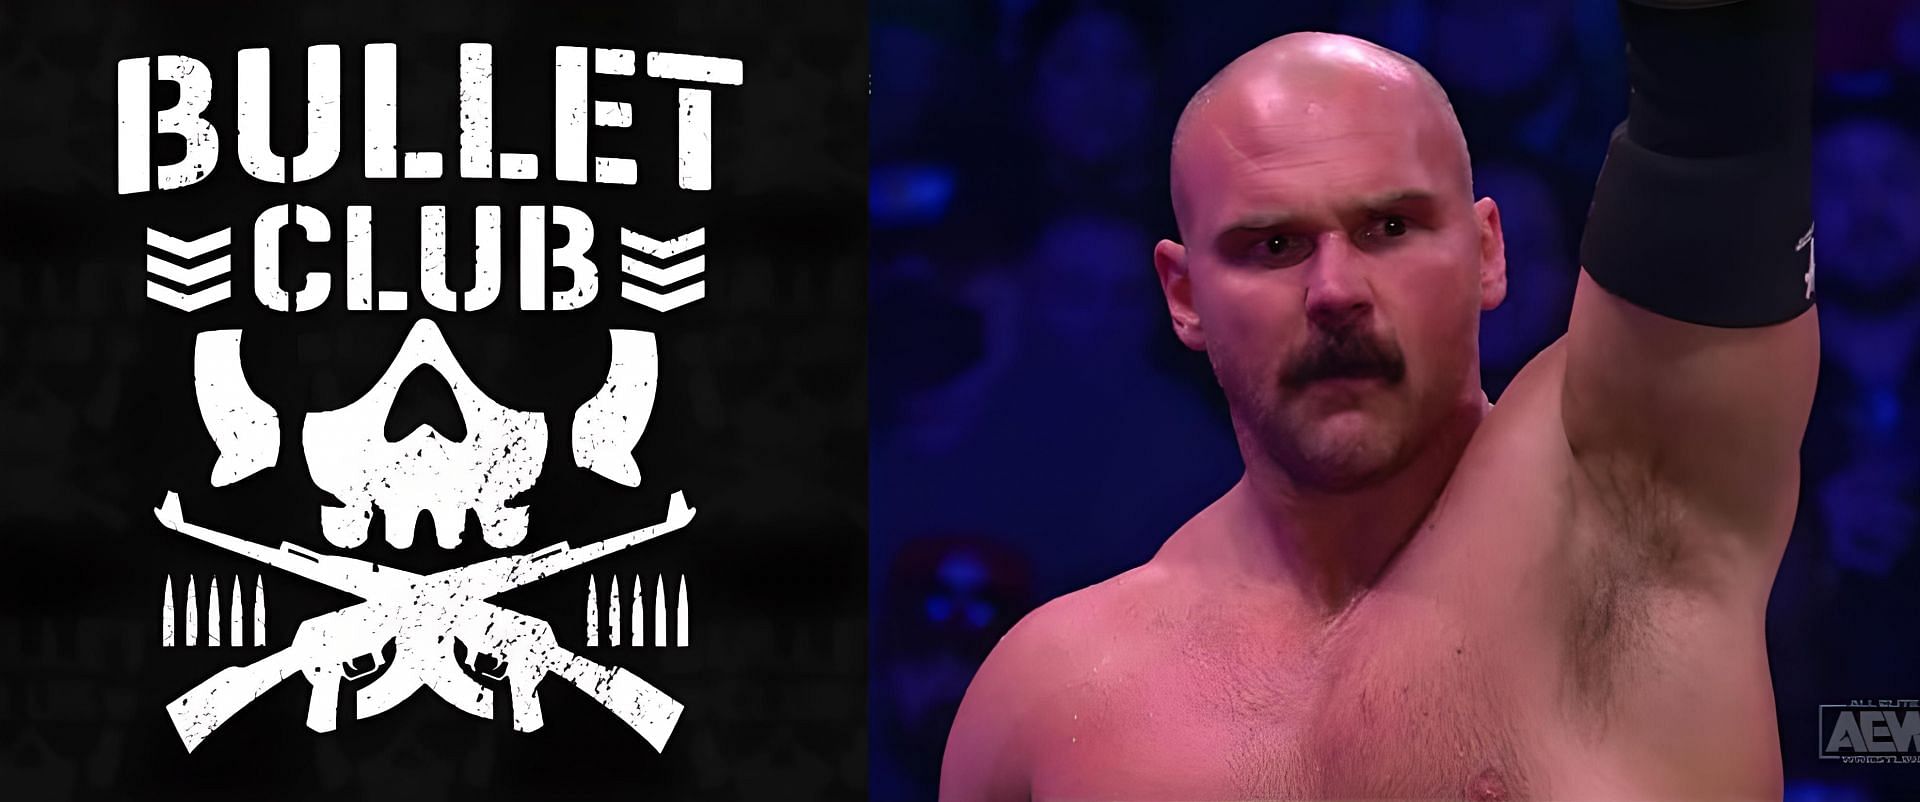 Dax Harwood aired an interesting response to Bullet Club